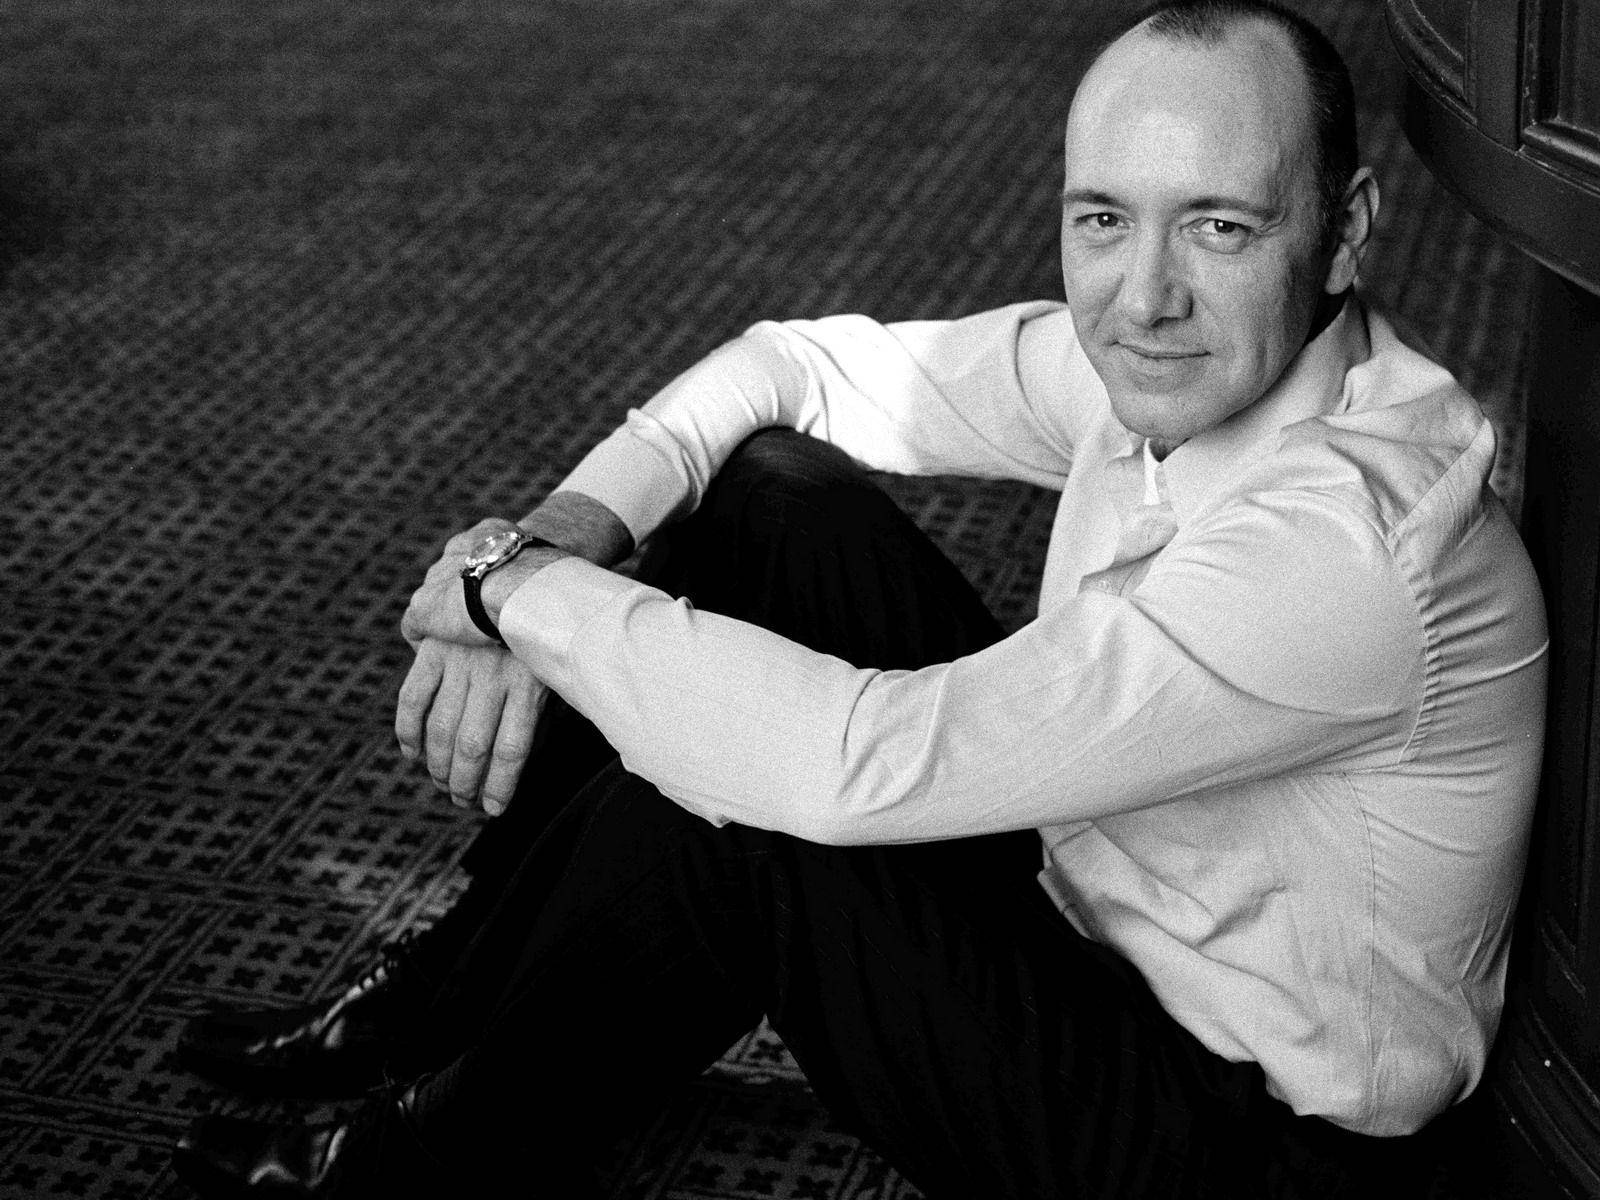 Kevin Spacey Sitting On The Floor Wallpaper